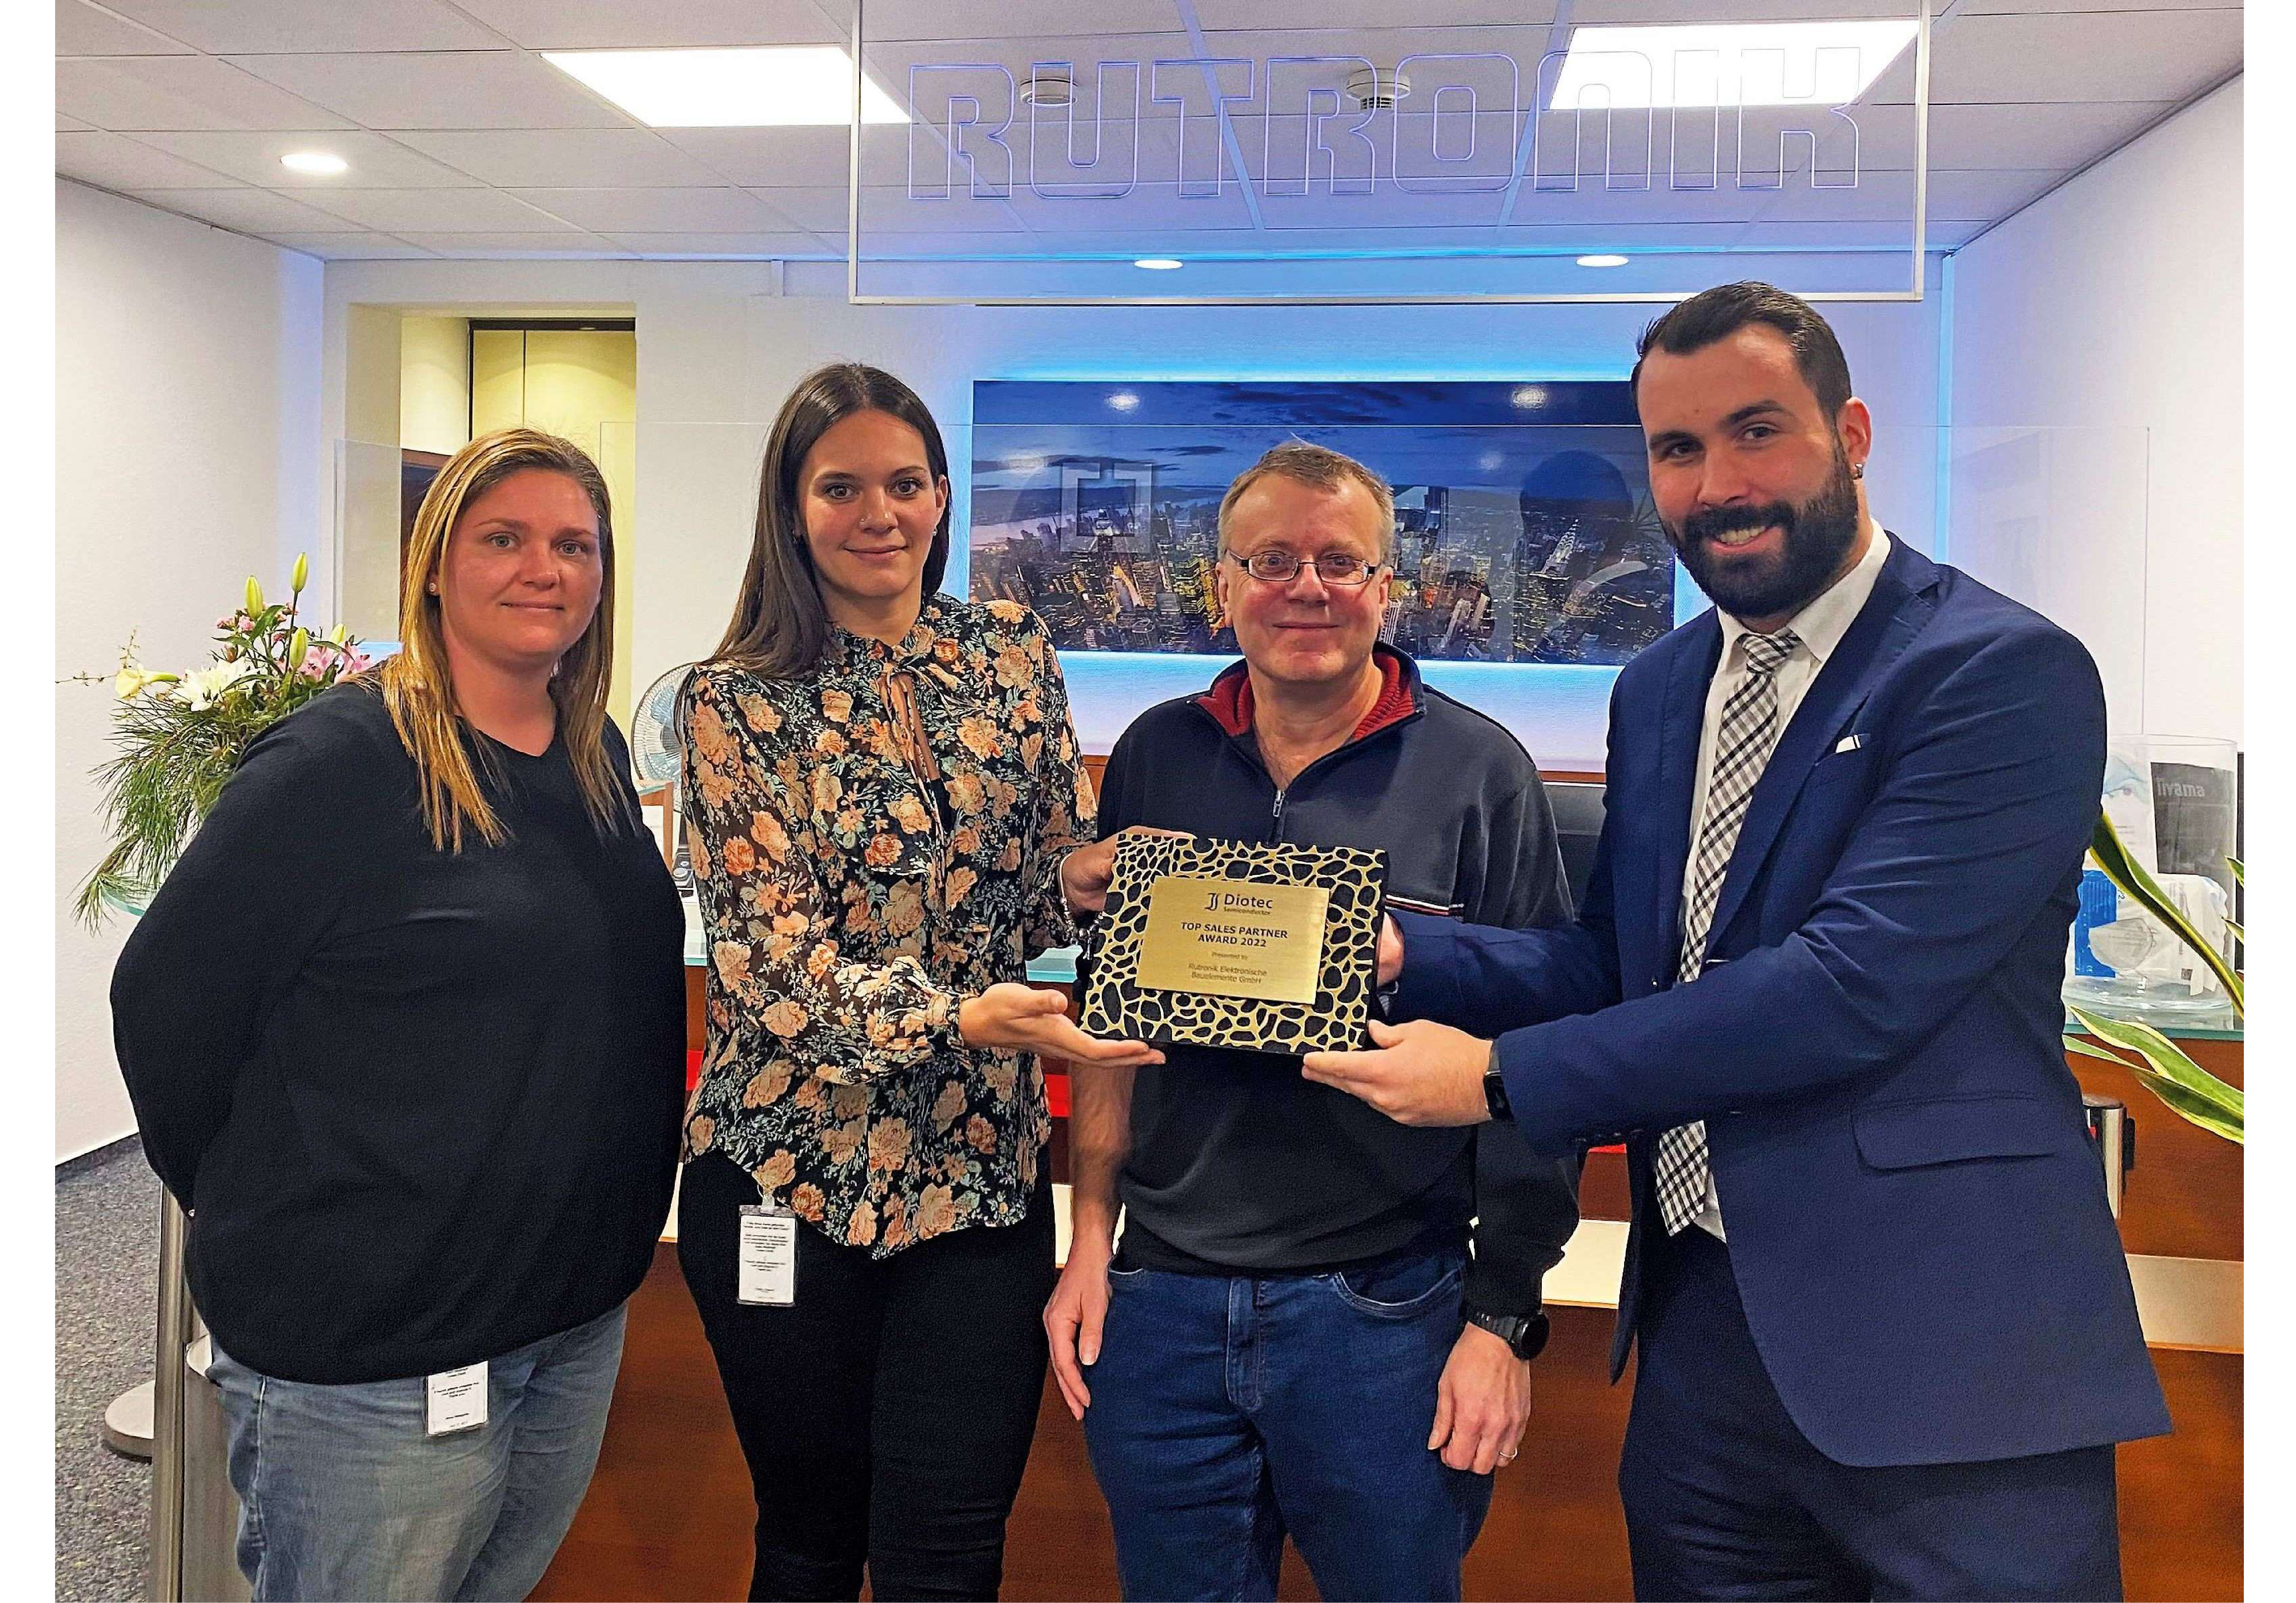 From left to right: Anne Wielgohs (Quoting Specialist Standard Products Corporate at Rutronik), Emilia Mance (Line Manager at Rutronik), Michael Weishaupt (Material Management at Rutronik) and Max Schlageter (Account Manager at Diotec).